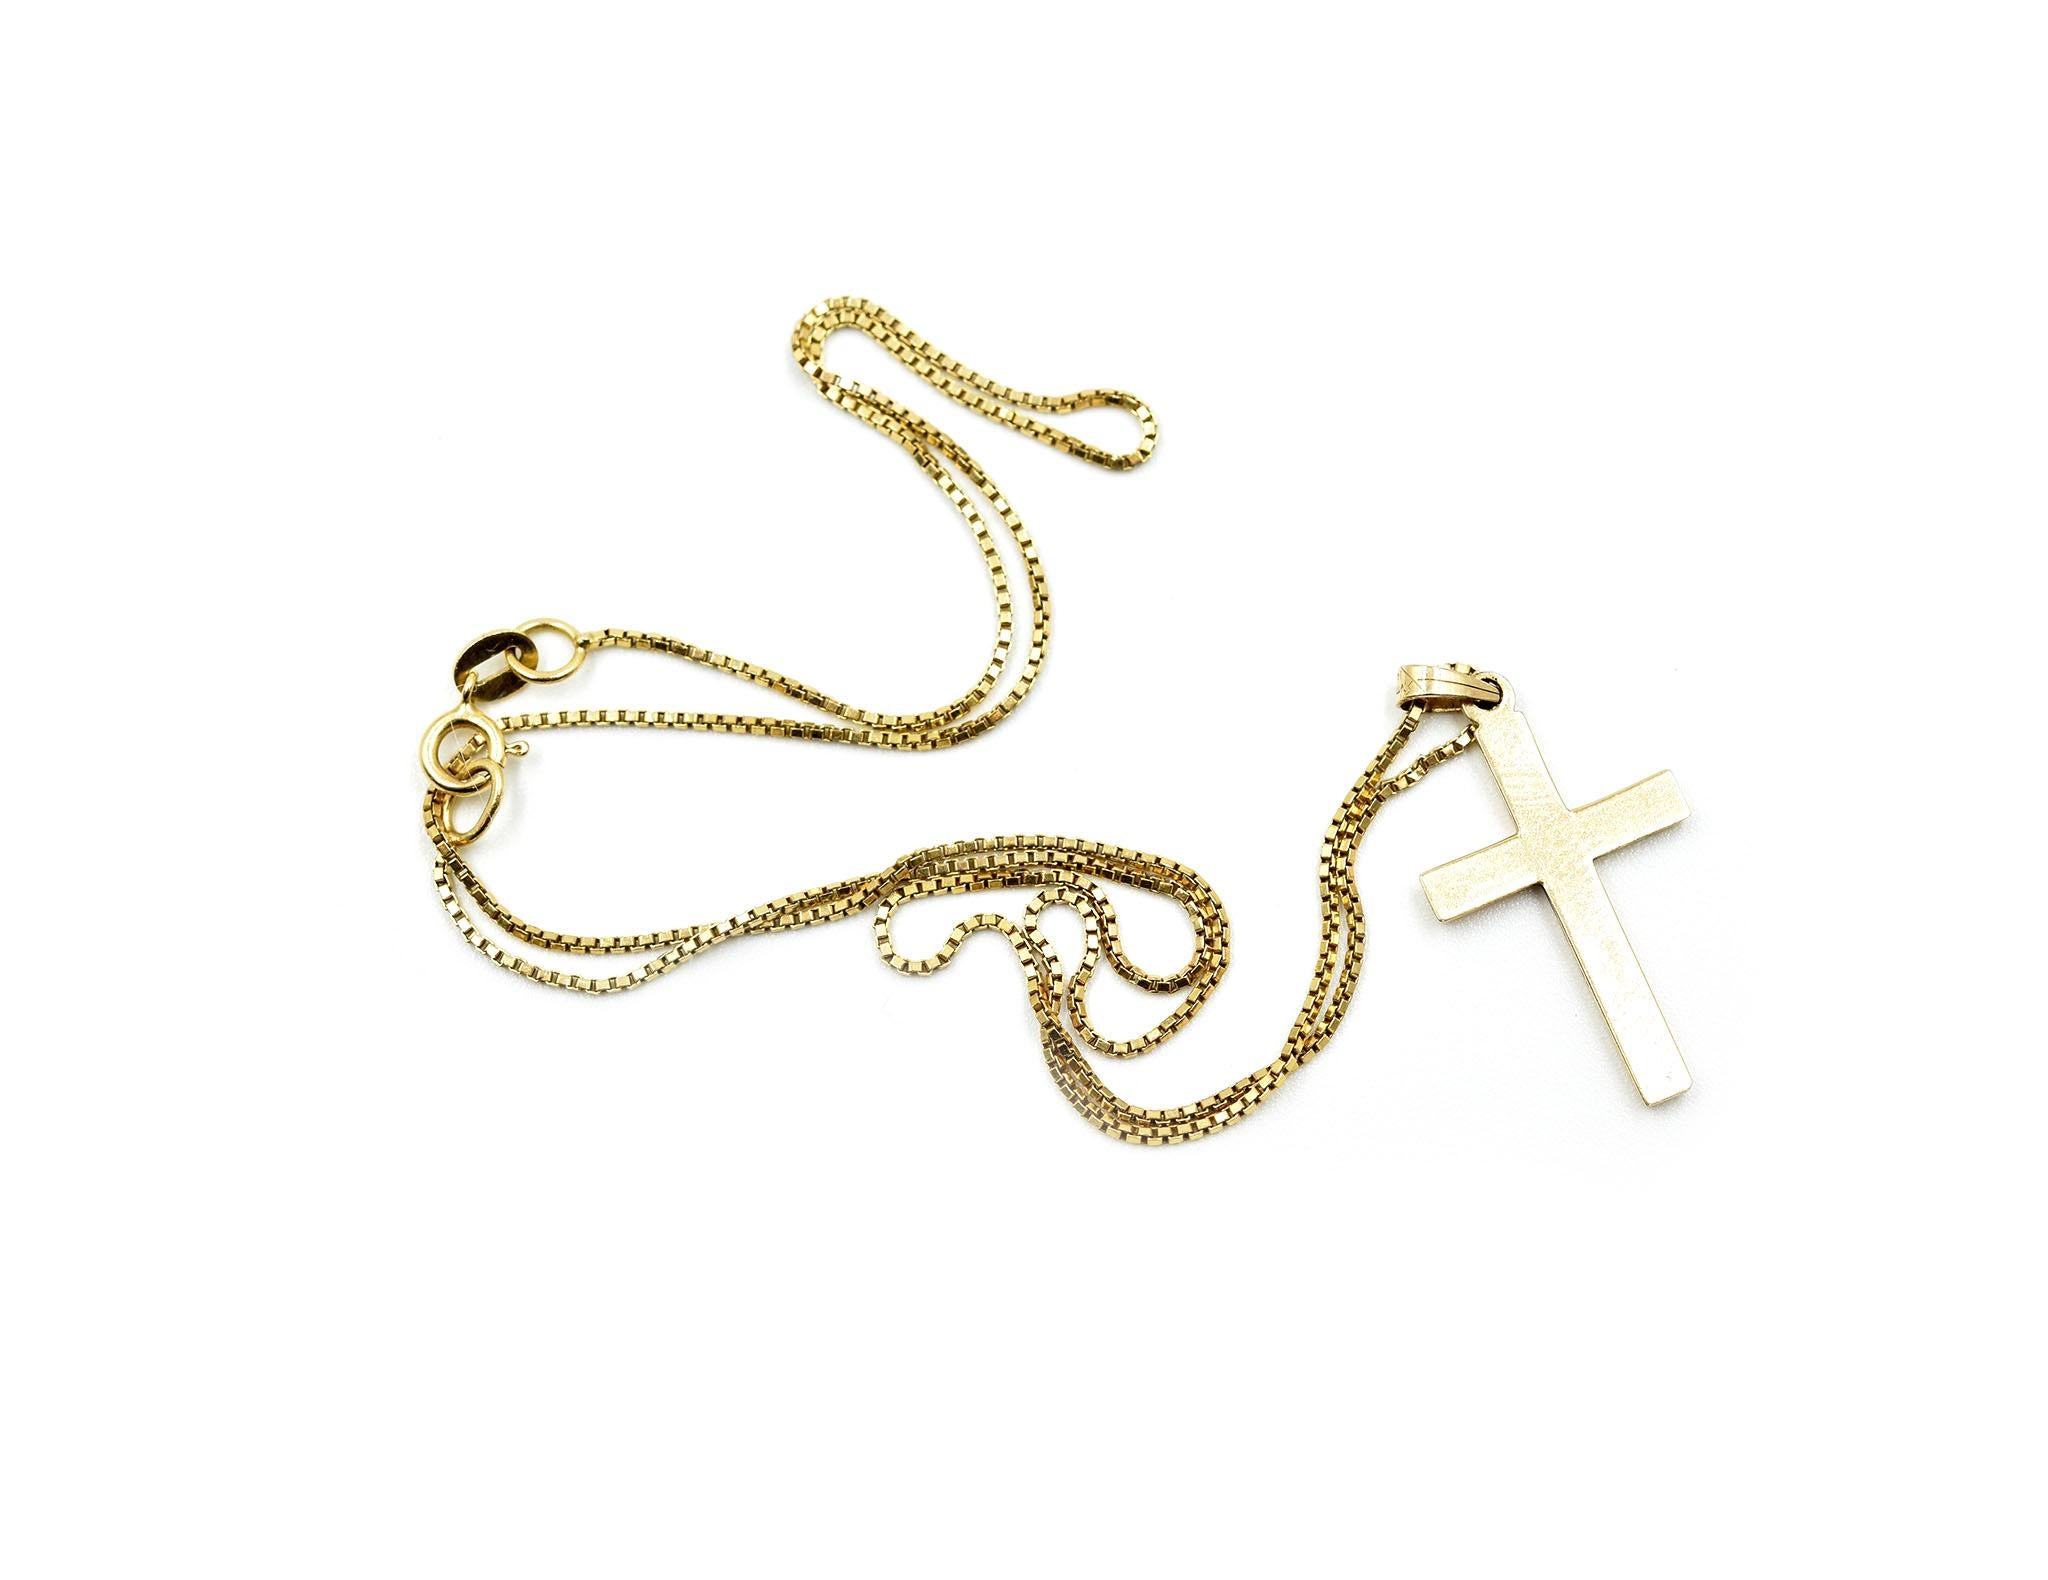 Designer: custom design
Material: 14k yellow gold
Dimensions: cross measures 3/4-inches long and 1/2-inches wide, necklace measures 16-inches long
Weight: 2.40 grams
